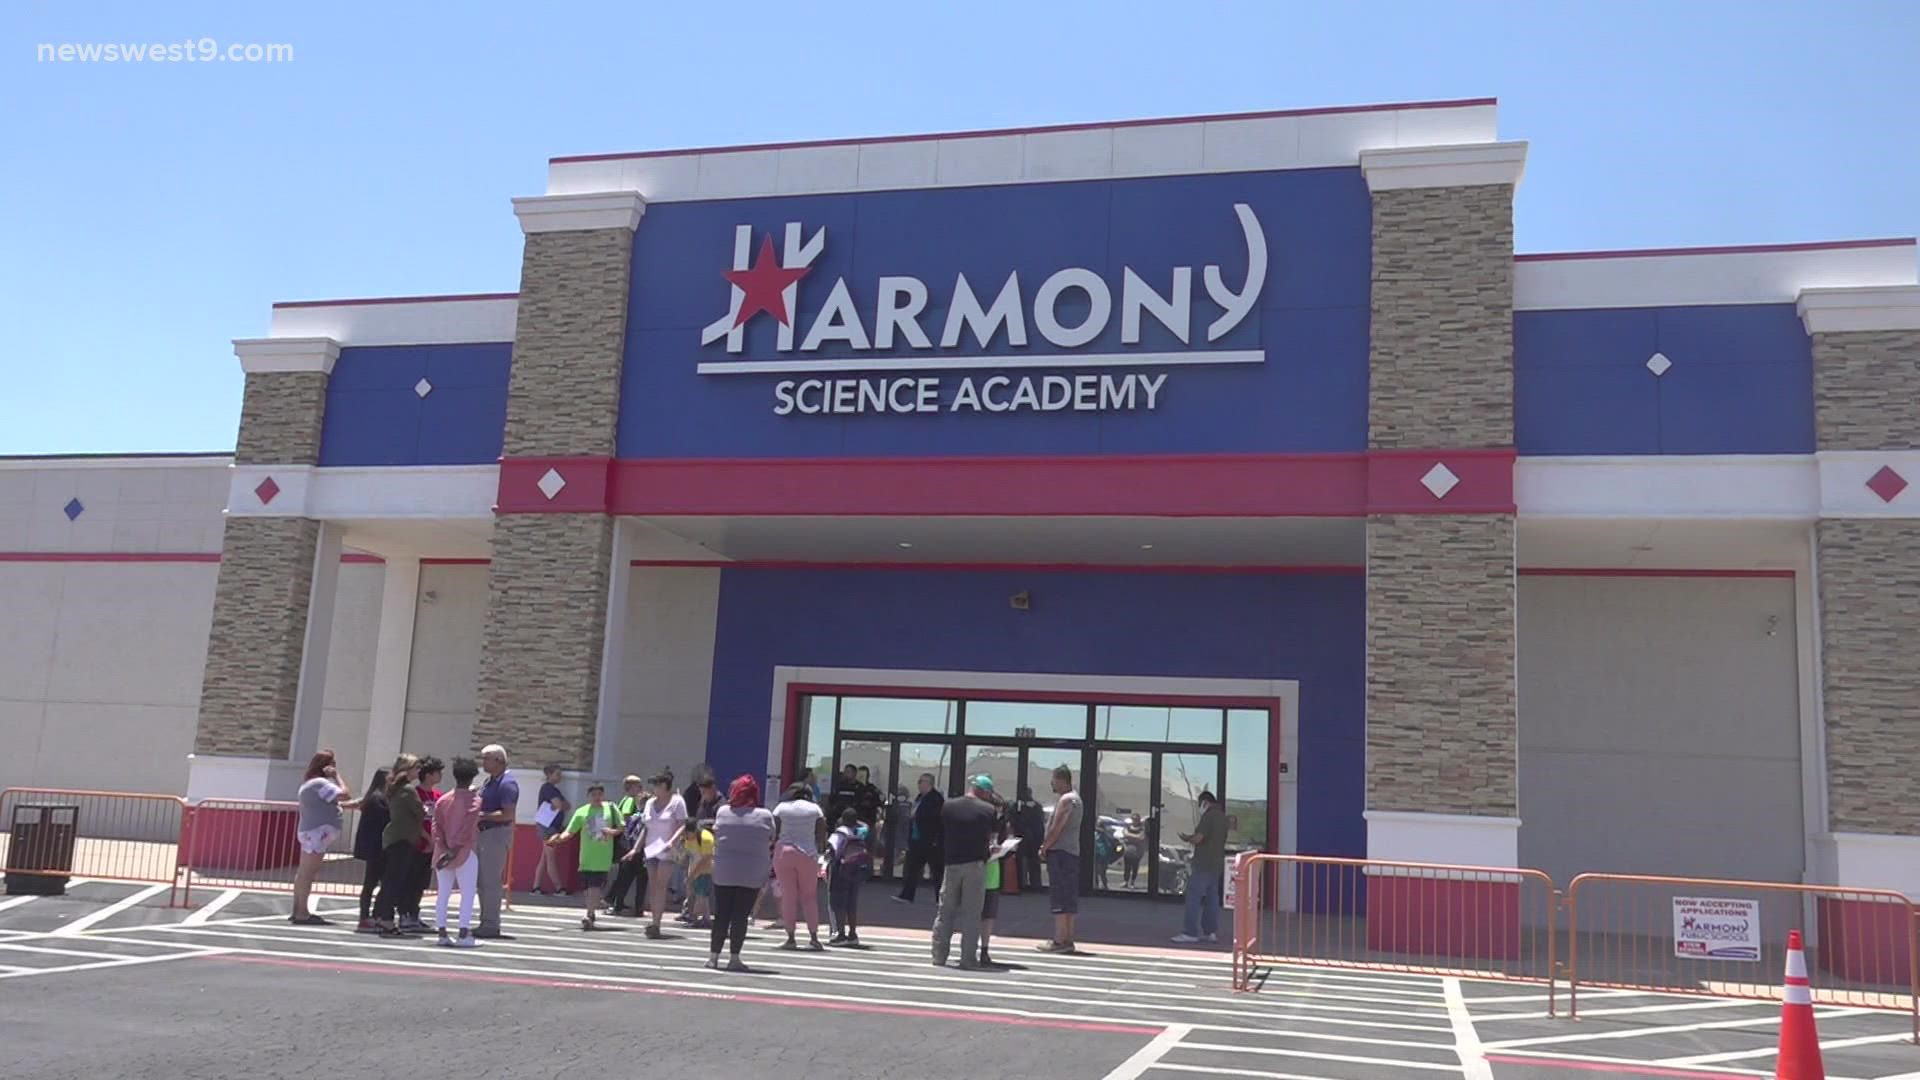 Harmony Science Academy, ECISD schools and others are staying vigilant in the wake of the tragedy.